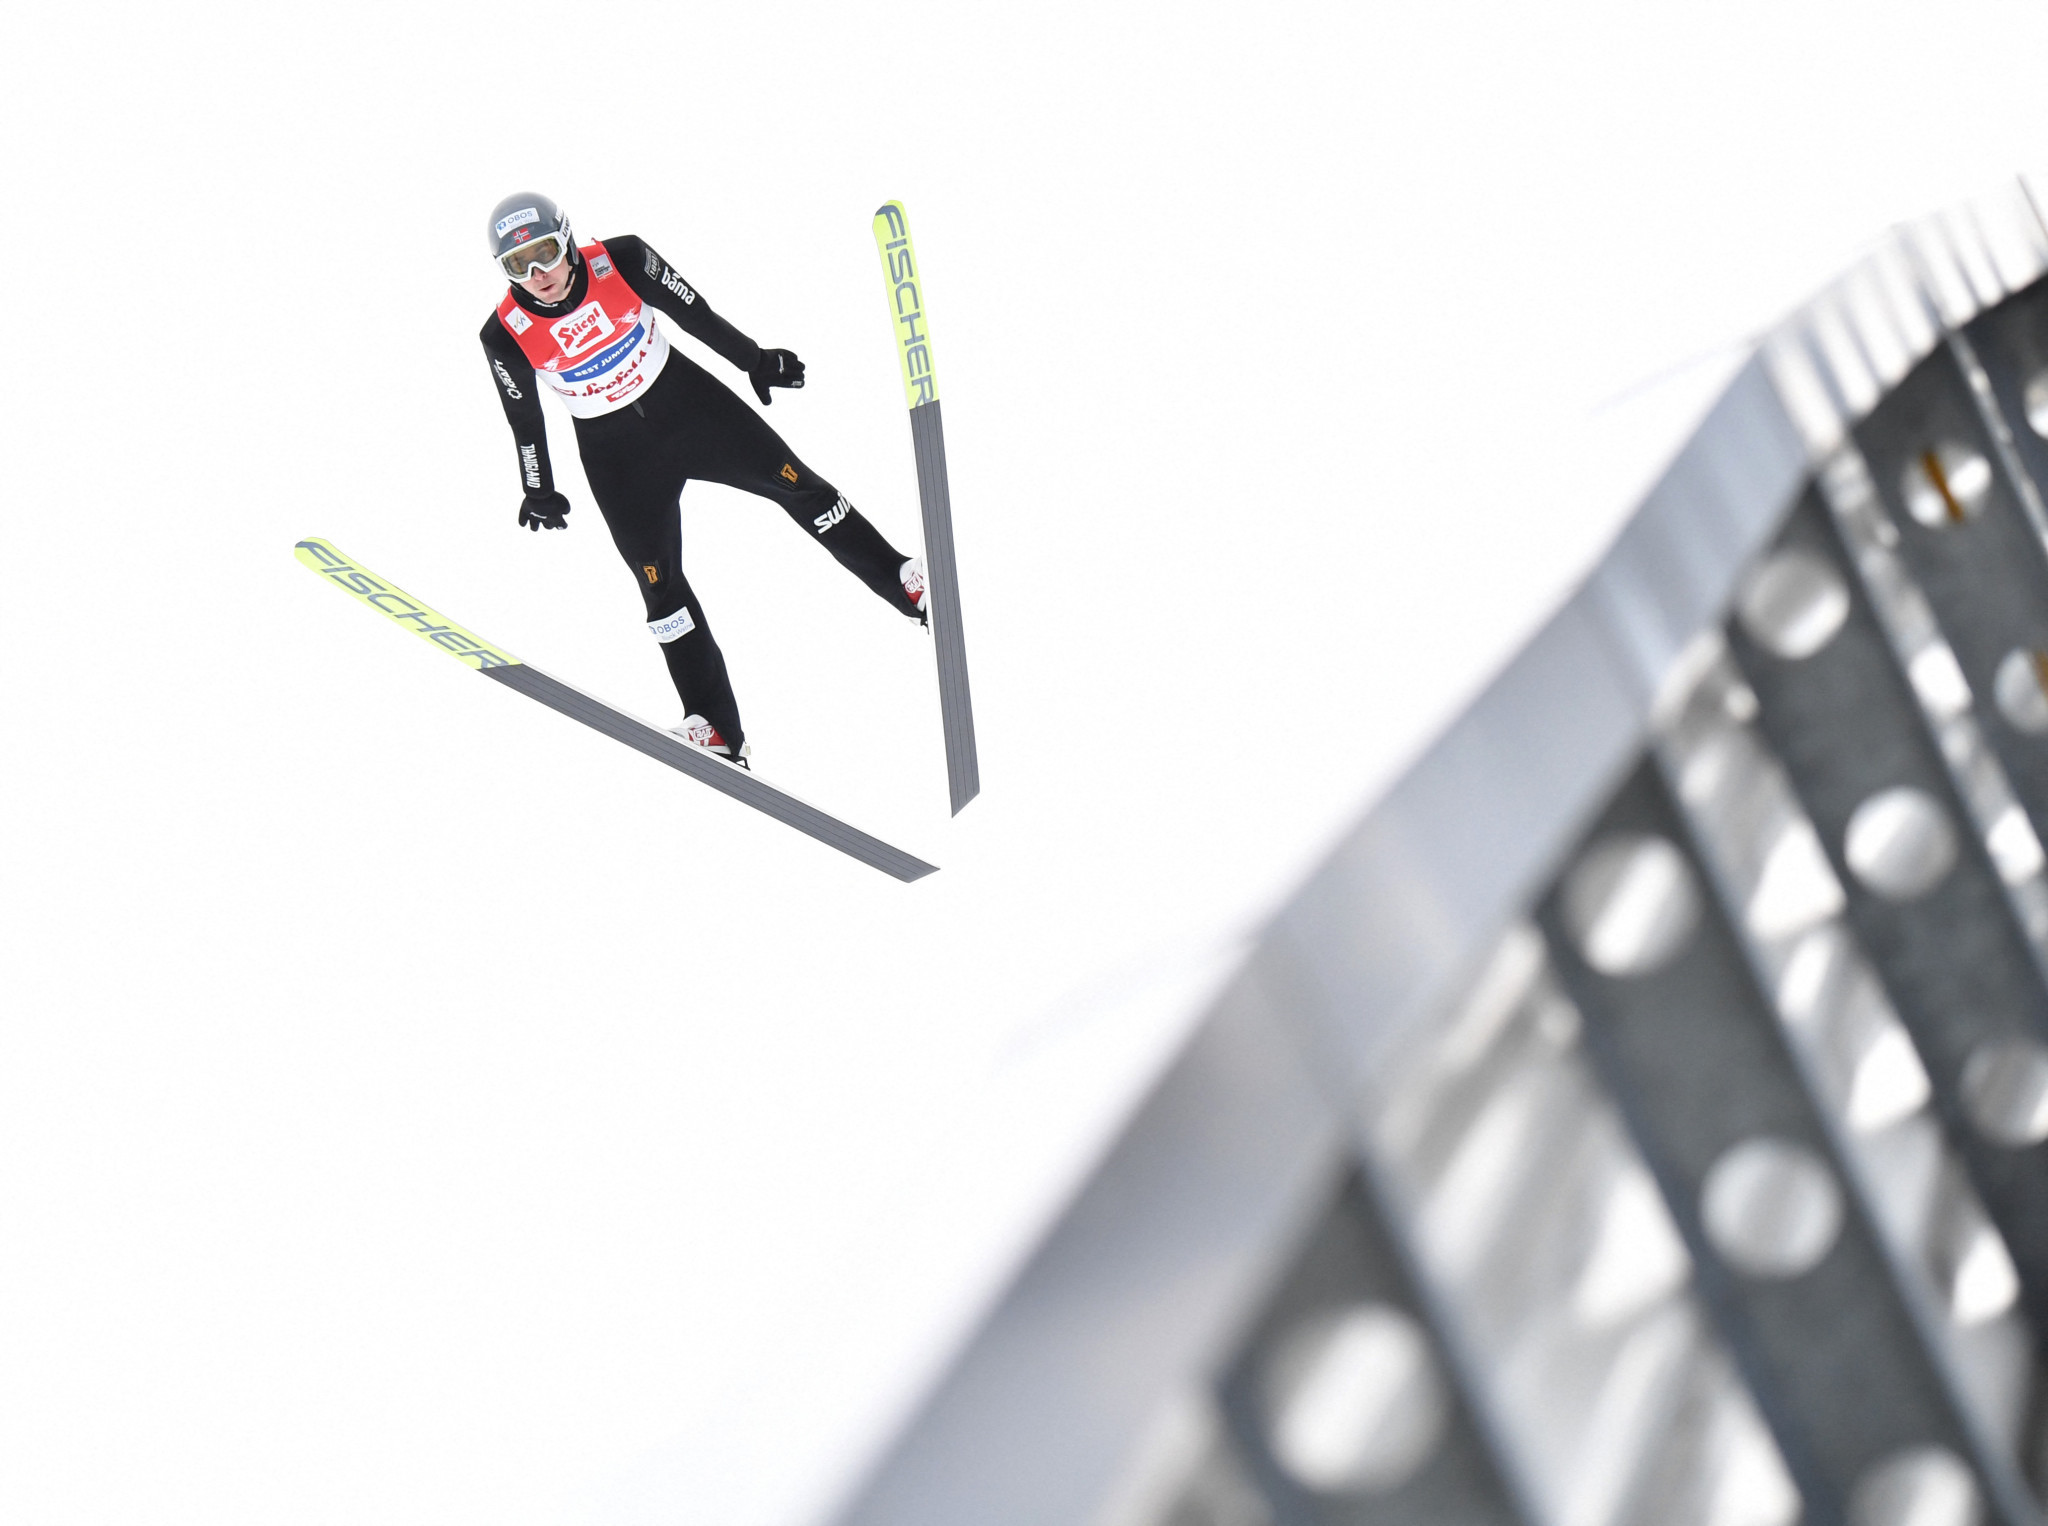 Nordic combined king Riiber begins quest for fifth crystal globe in a row in Ruka